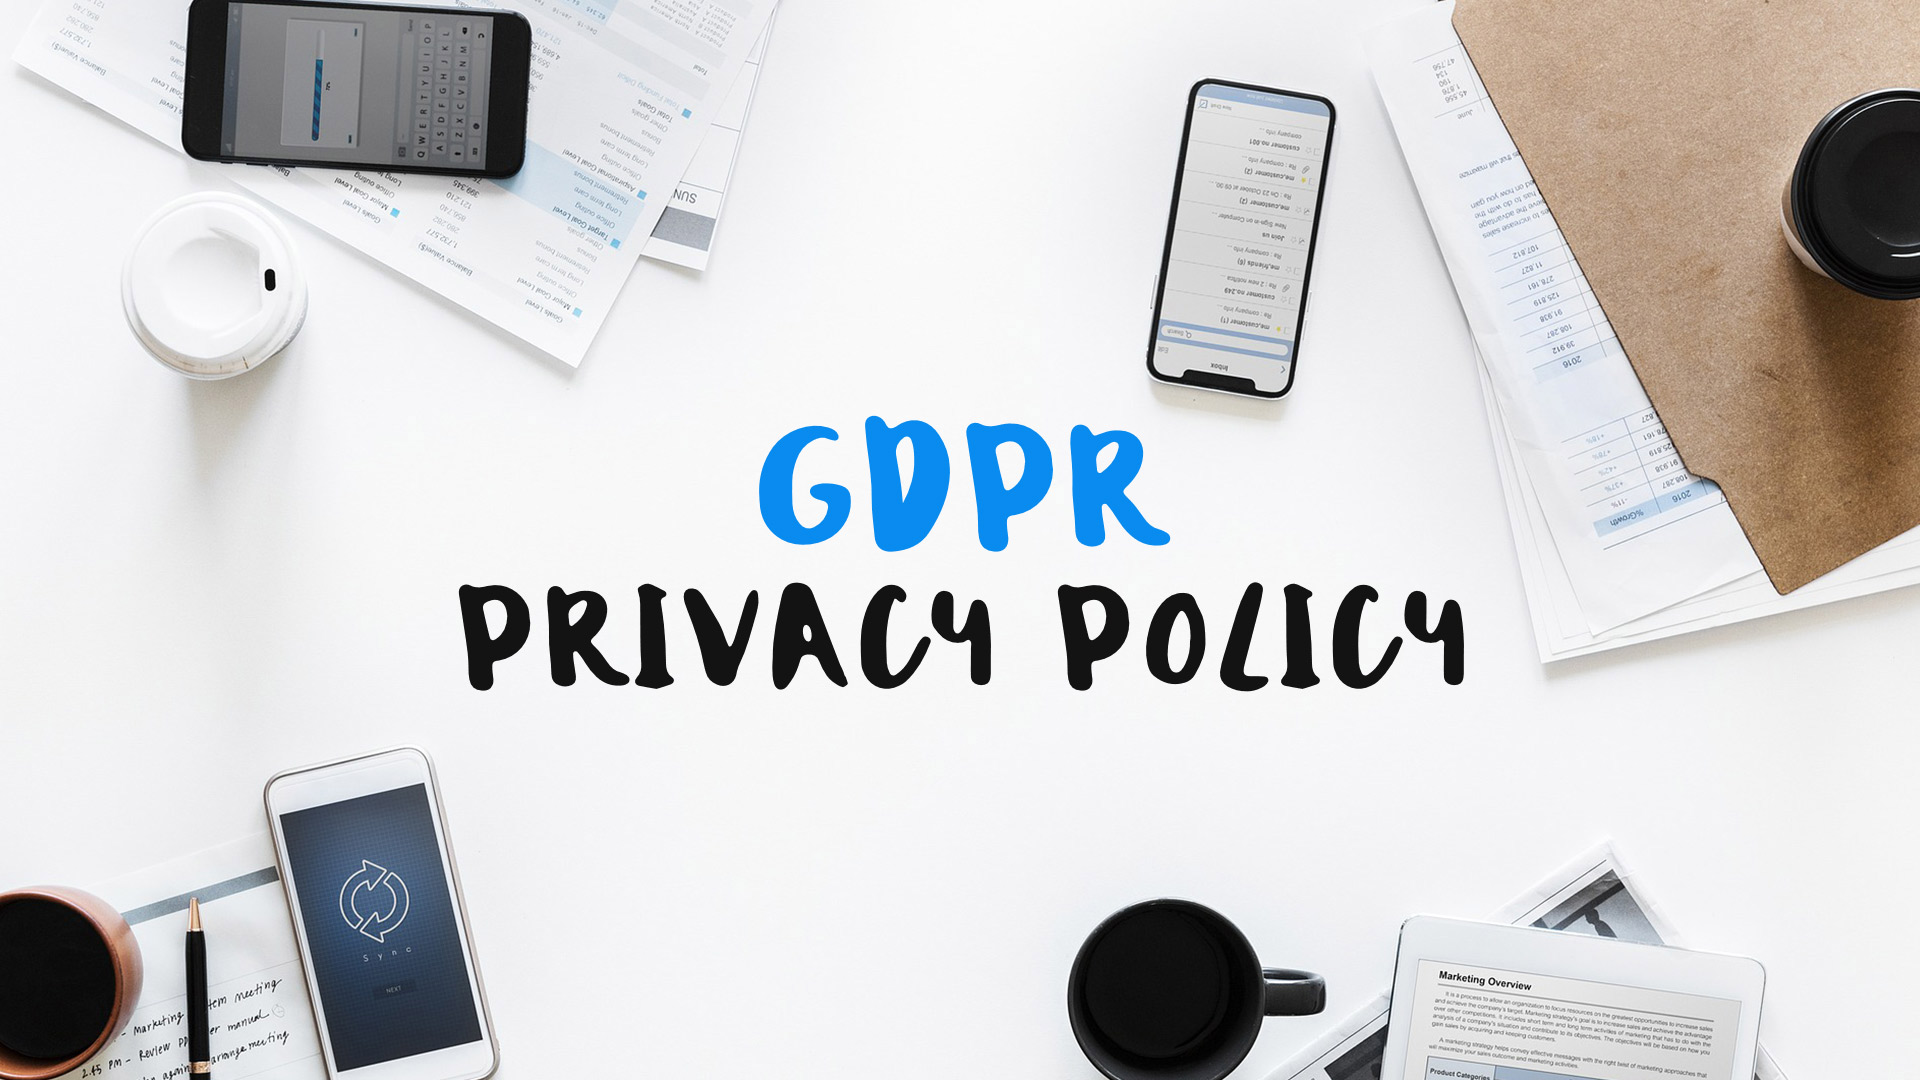 Getting GDPR Ready – The Privacy Policy